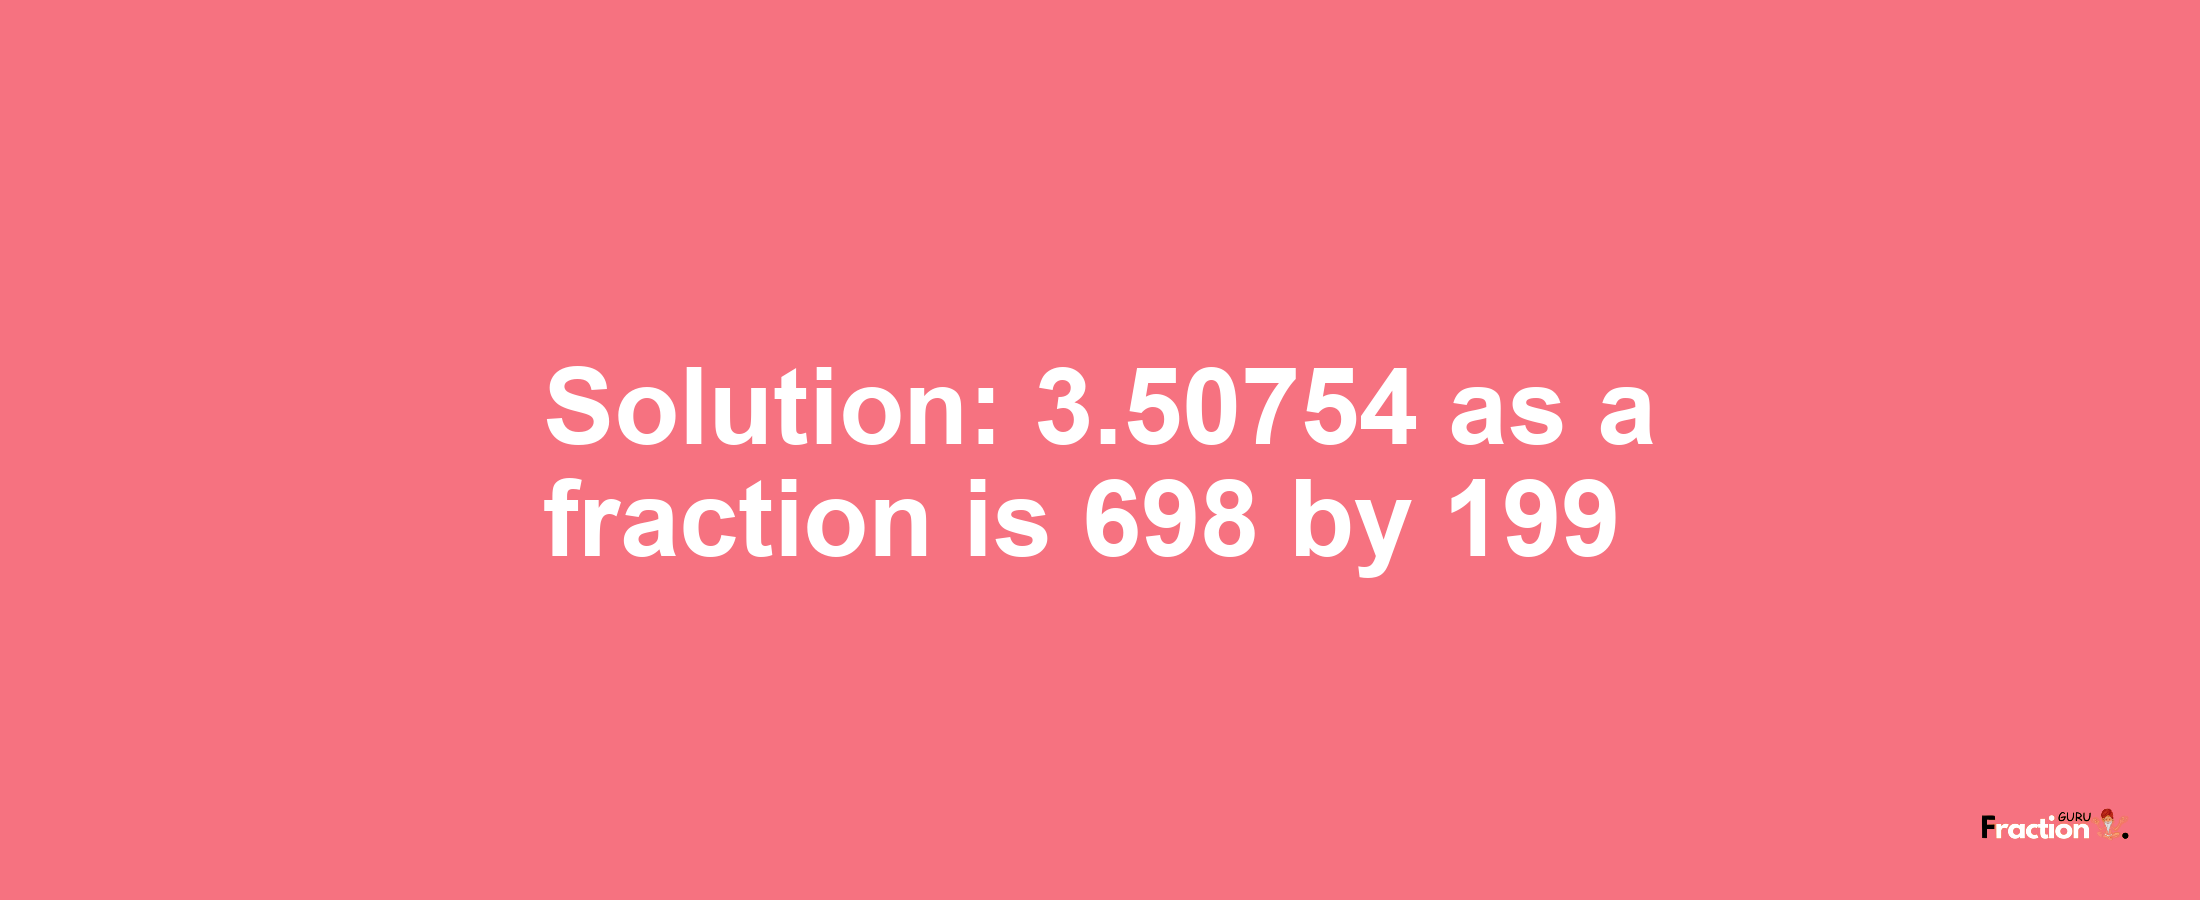 Solution:3.50754 as a fraction is 698/199